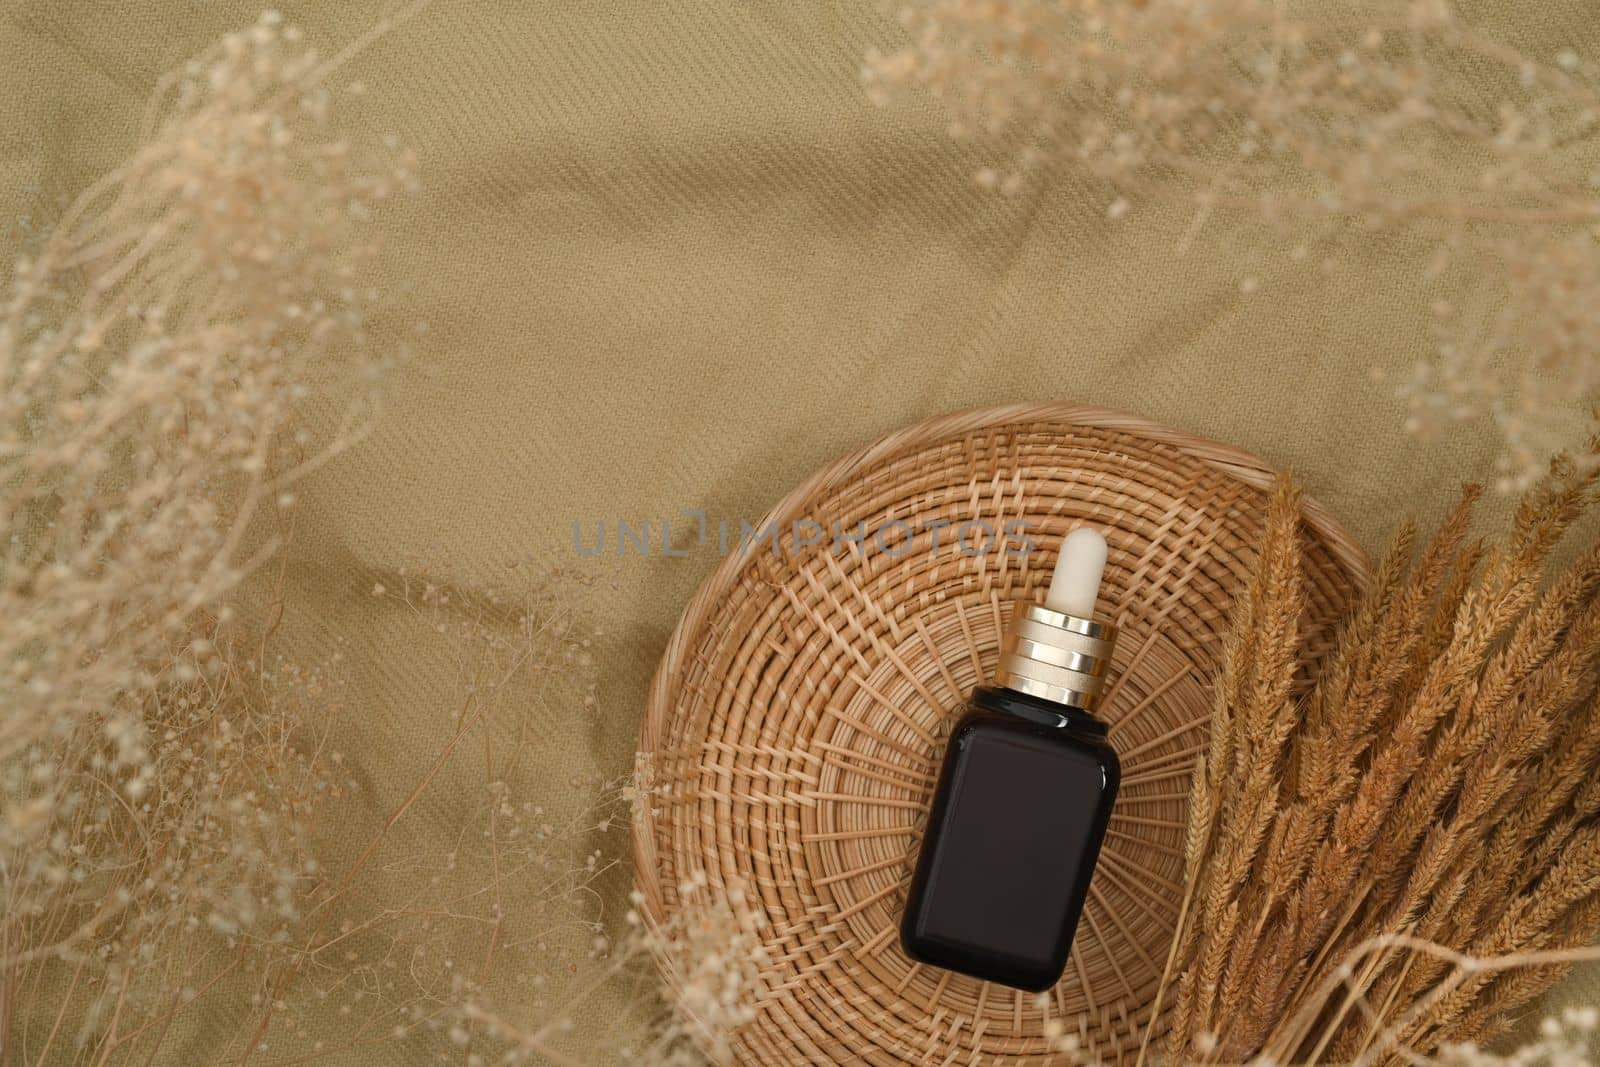 Brown serum dropper bottle on round rattan basket. Skincare beauty products design and branding.